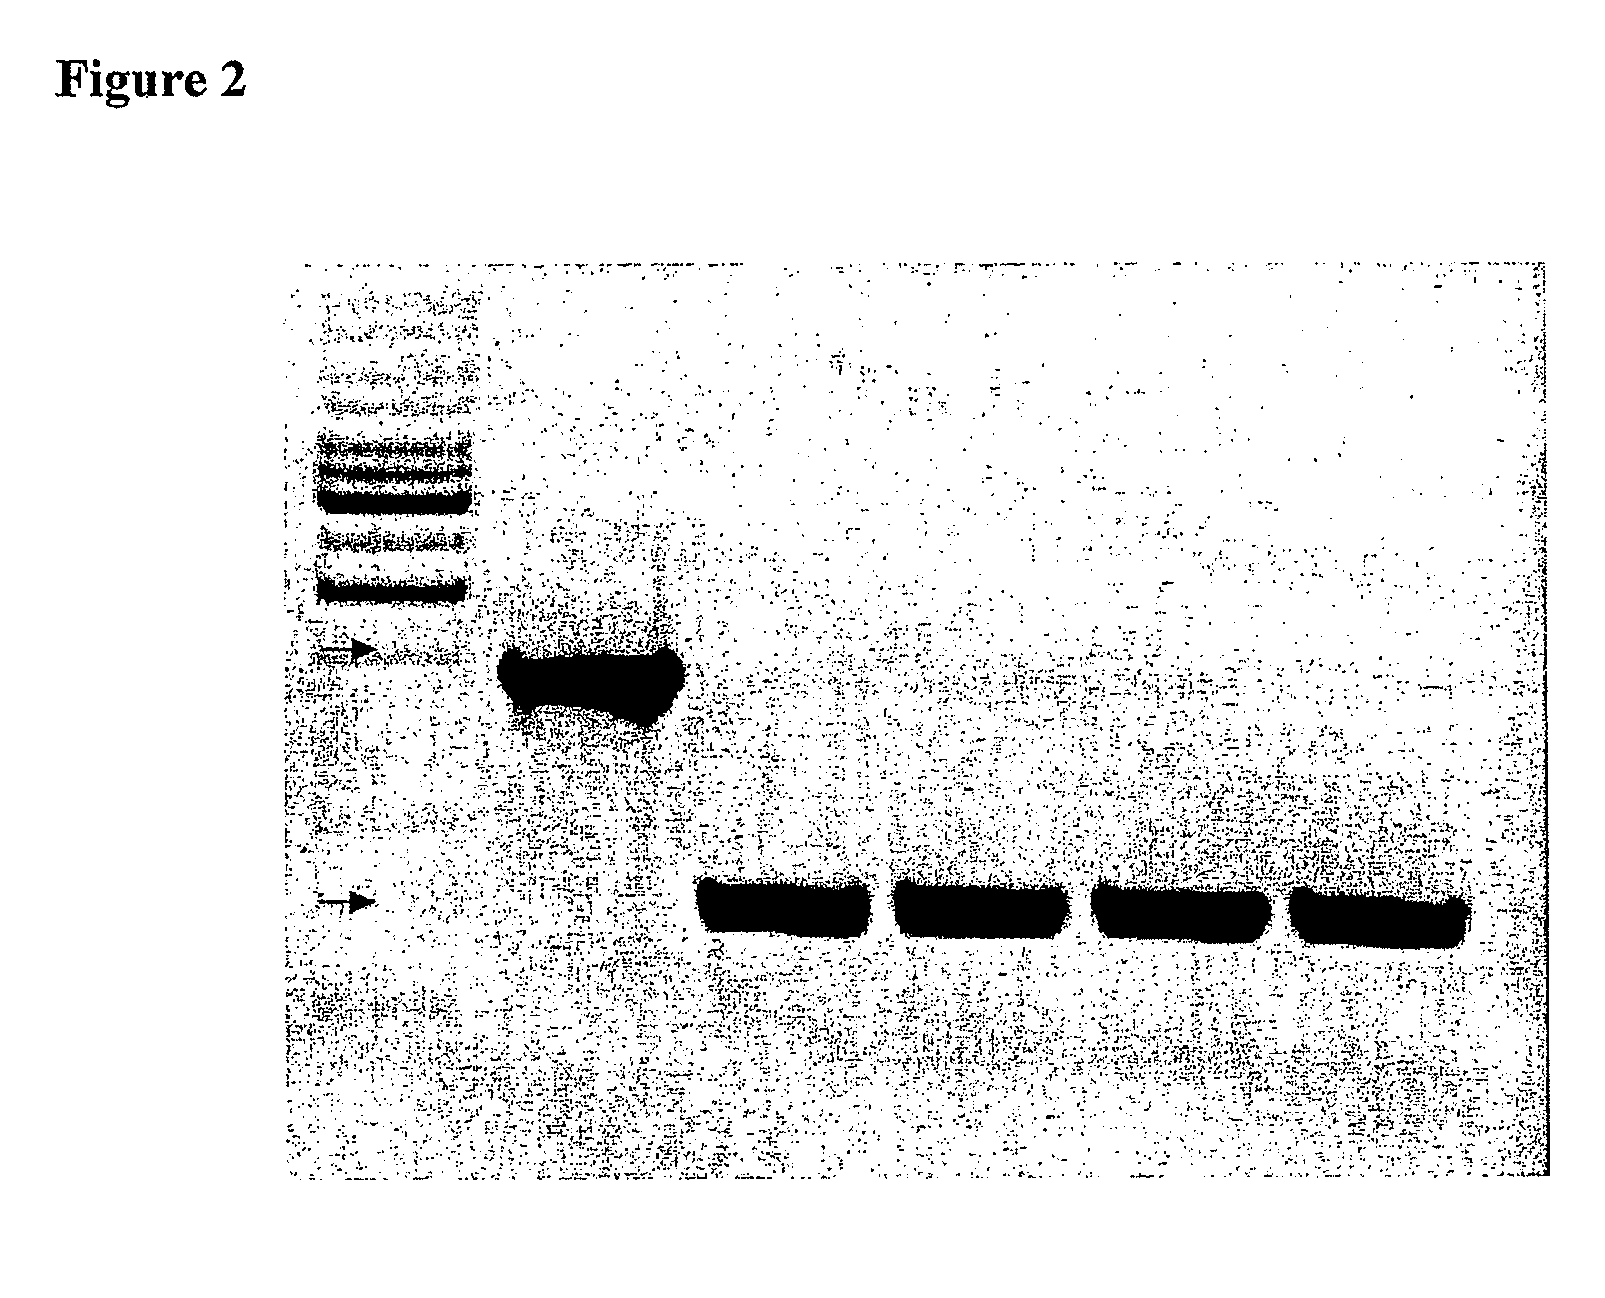 Attenuated Salmonella enterica serovar paratyphi a and uses thereof